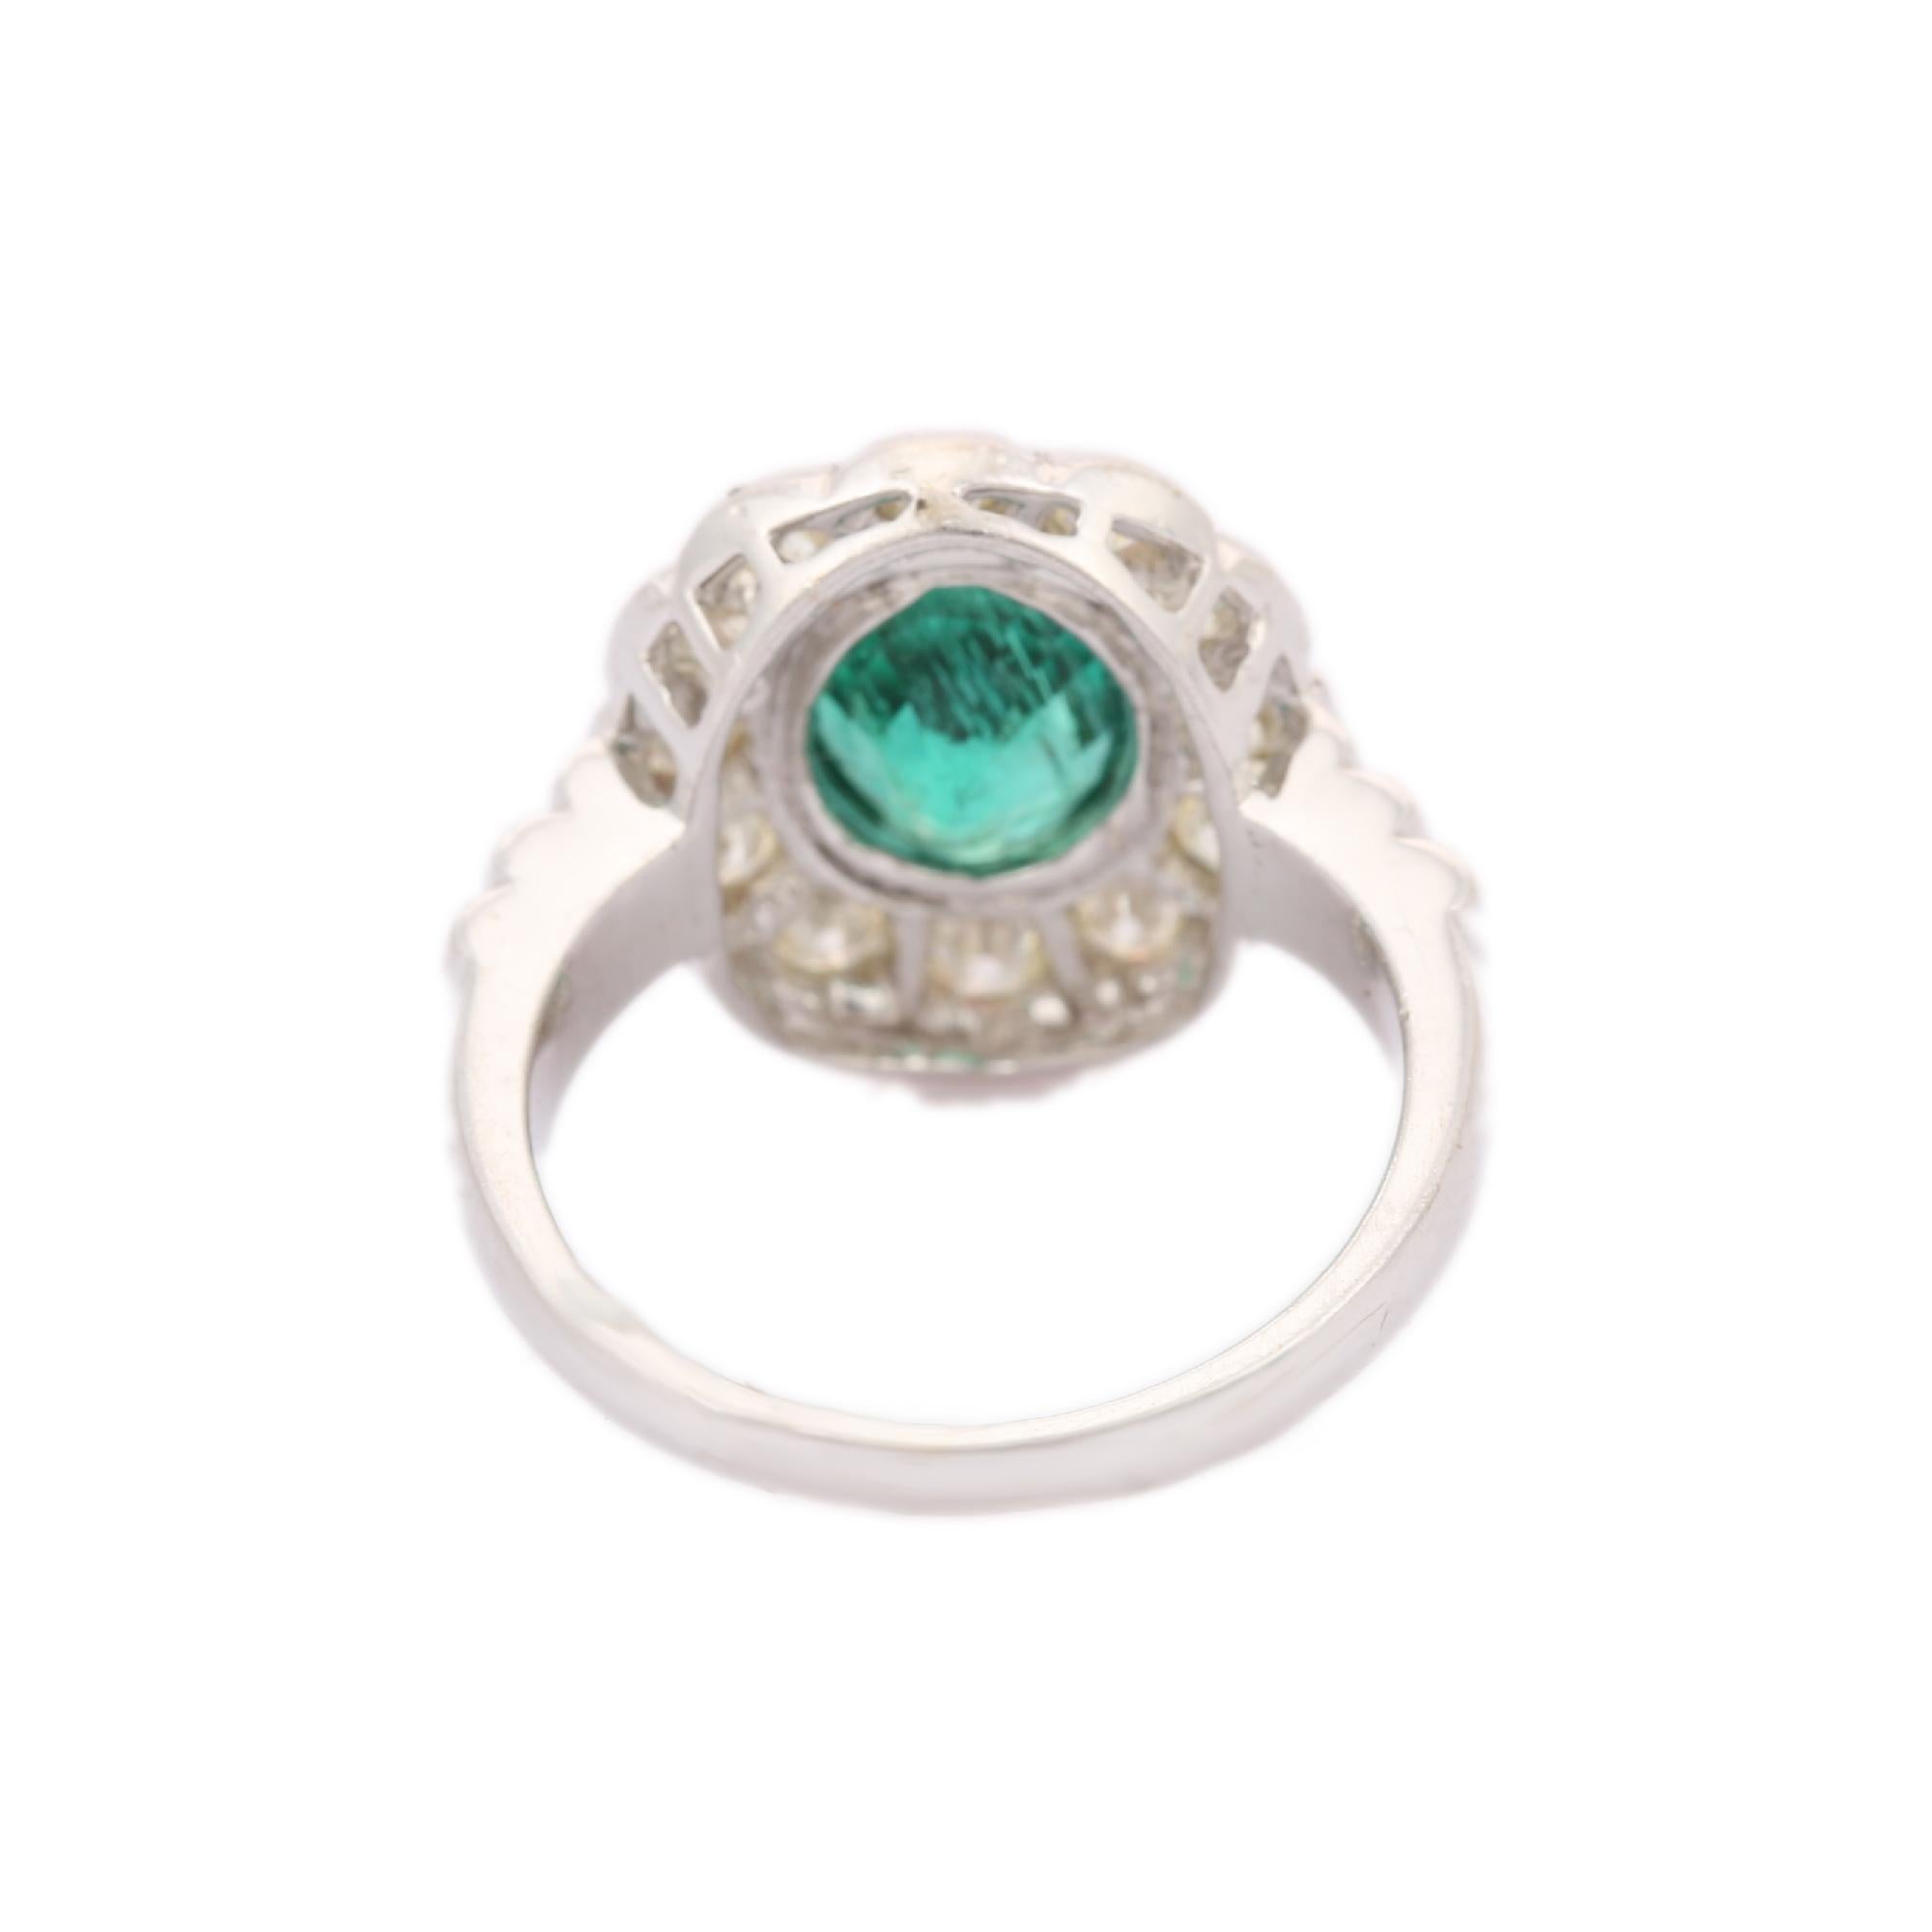 For Sale:  Exquisite 18kt Solid White Gold Emerald Flower Ring With Diamonds 6